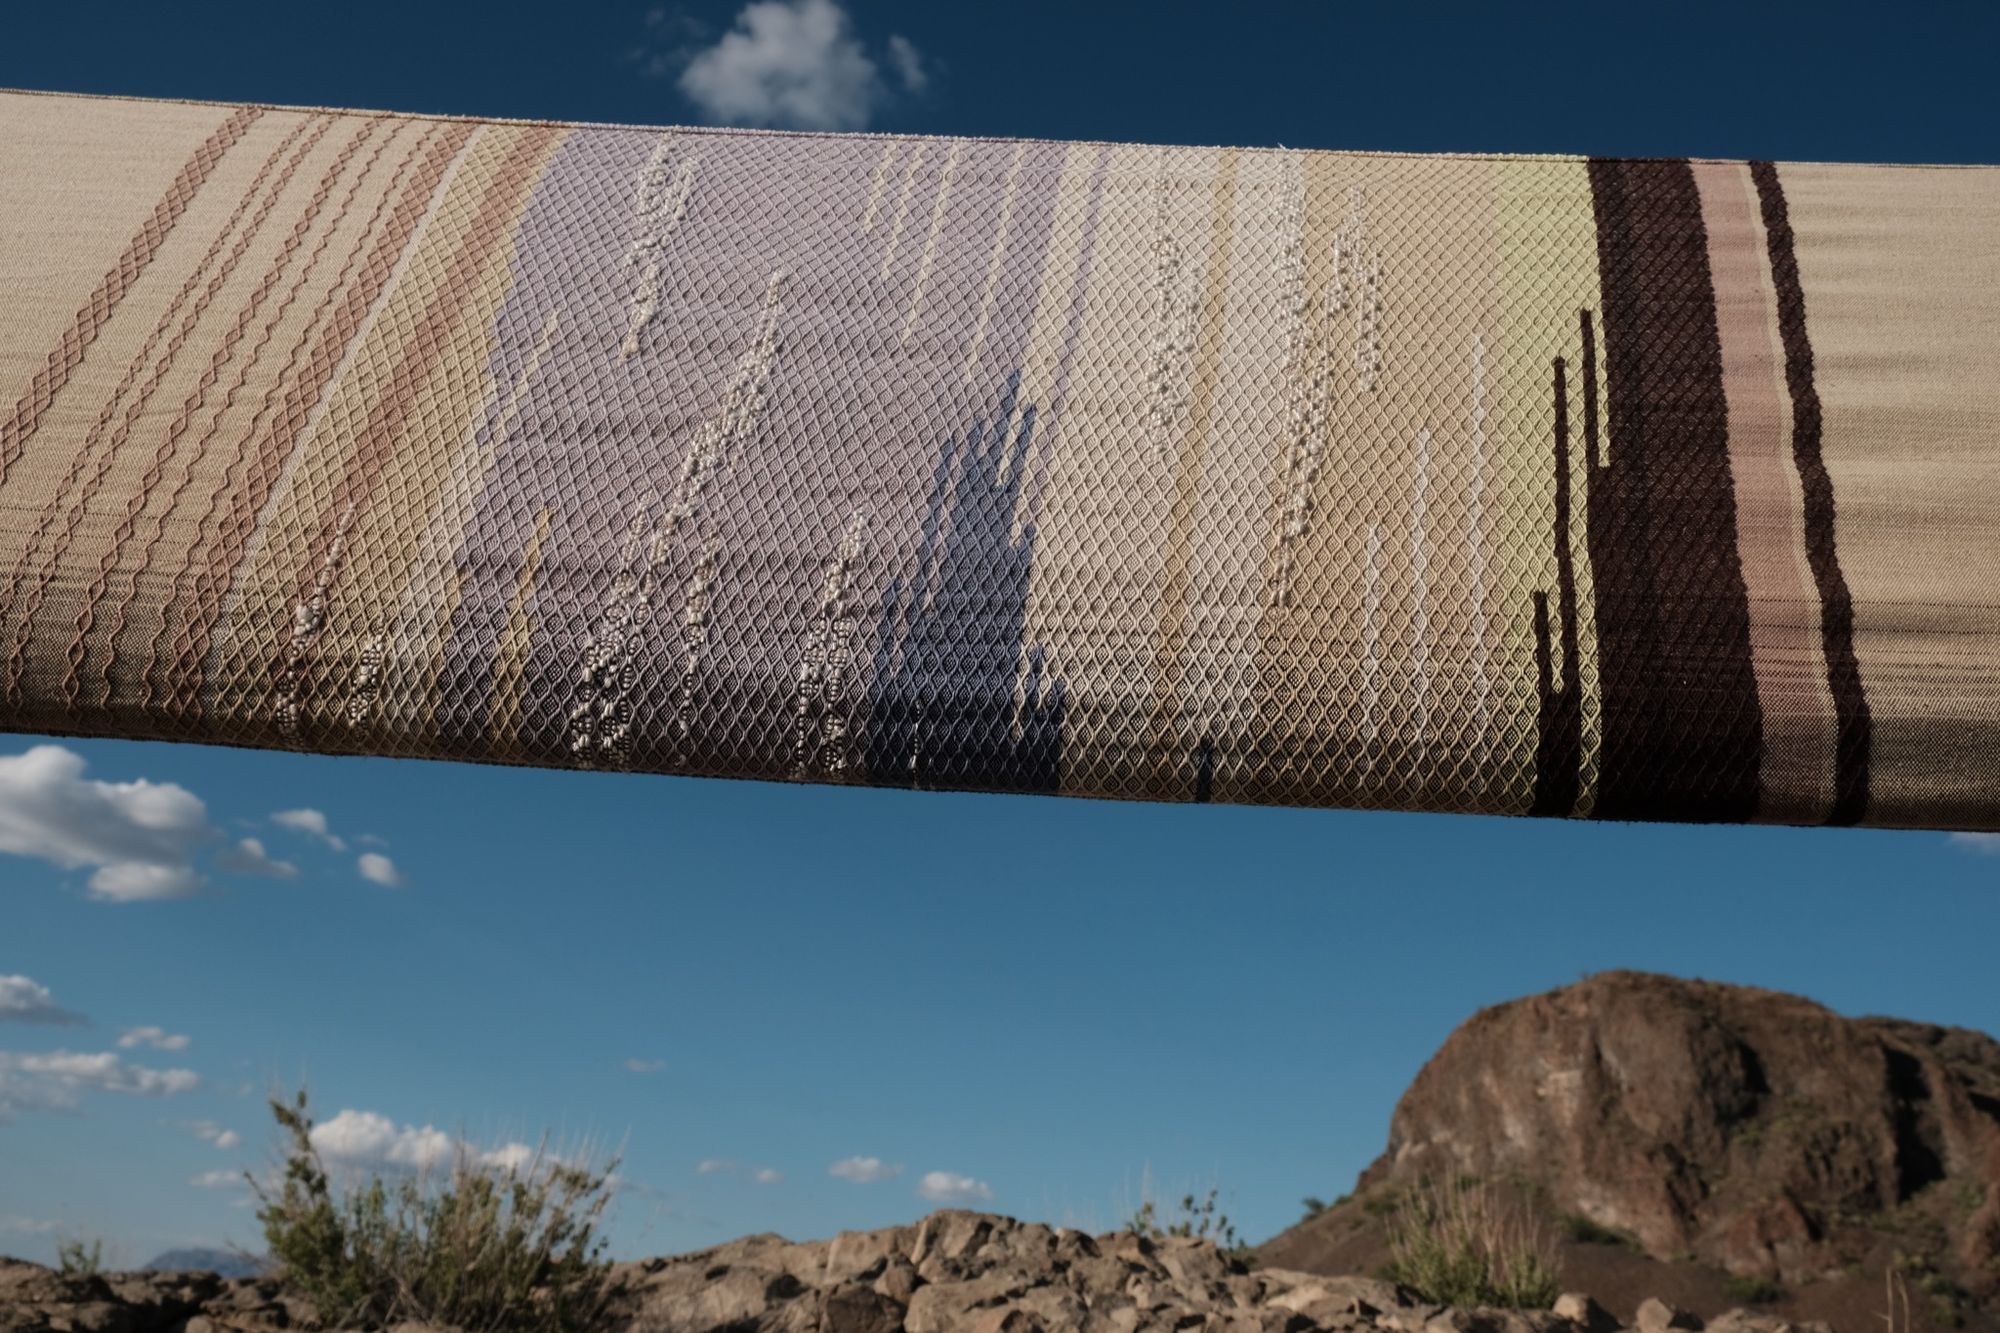 A long piece of handwoven fabric in lilac purple, dark brown and earth tones is stretched out against a blue sky